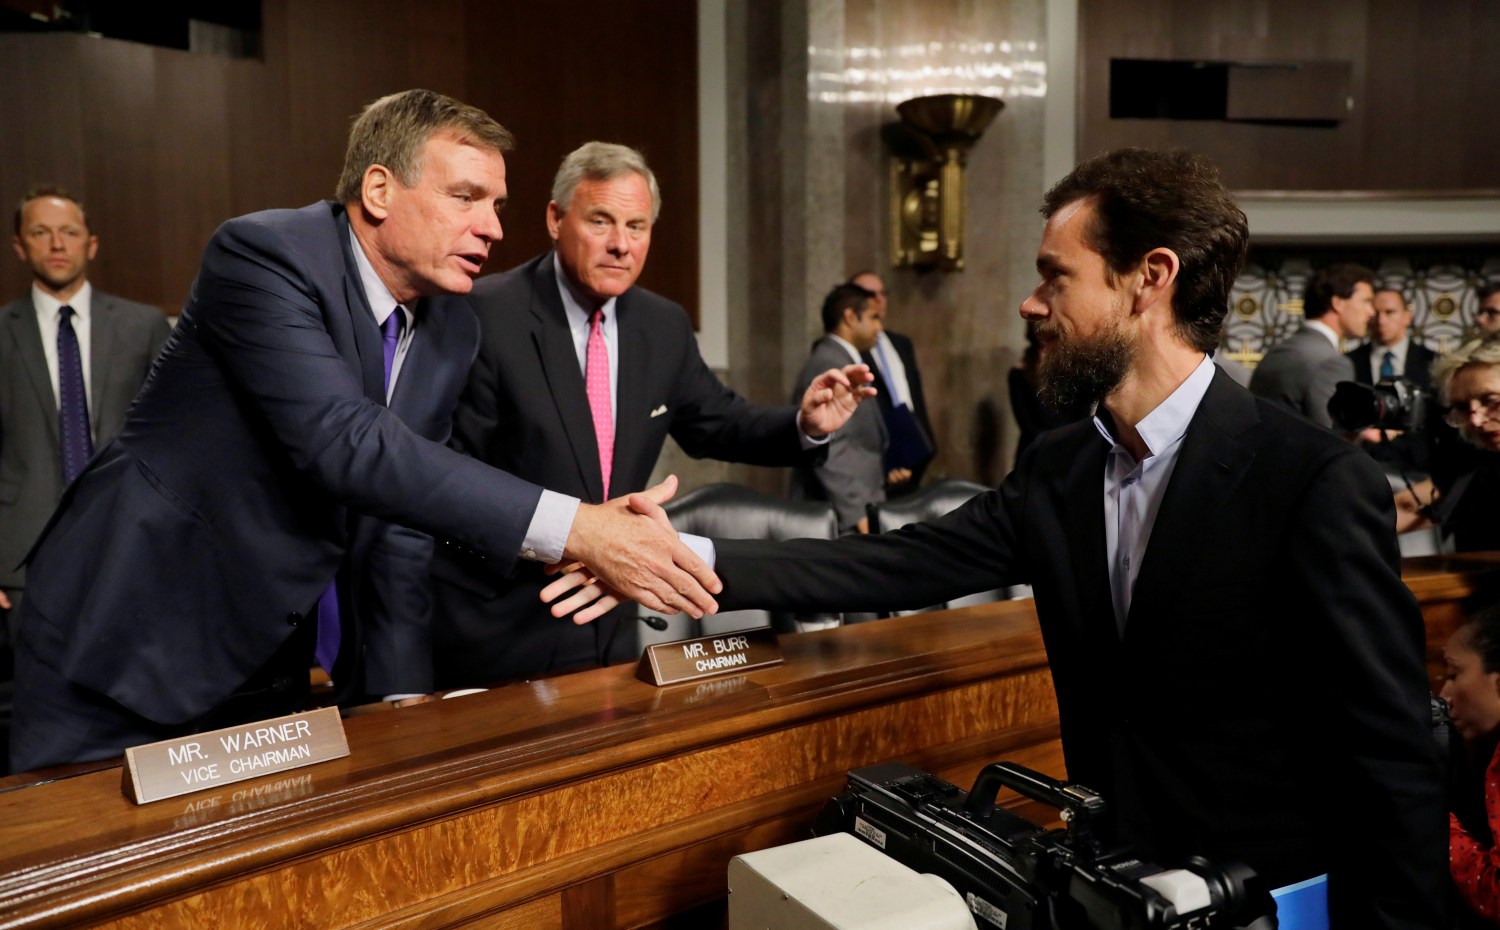 Senate Intelligence Committee Vice Chairman Senator Mark Warner and Chairman Senator Richard Burr thank Twitter CEO Jack Dorsey for his testimony at the conclusion of a hearing on foreign influence operations on social media platforms on Capitol Hill in Washington, U.S., September 5, 2018. REUTERS/Jim Bourg